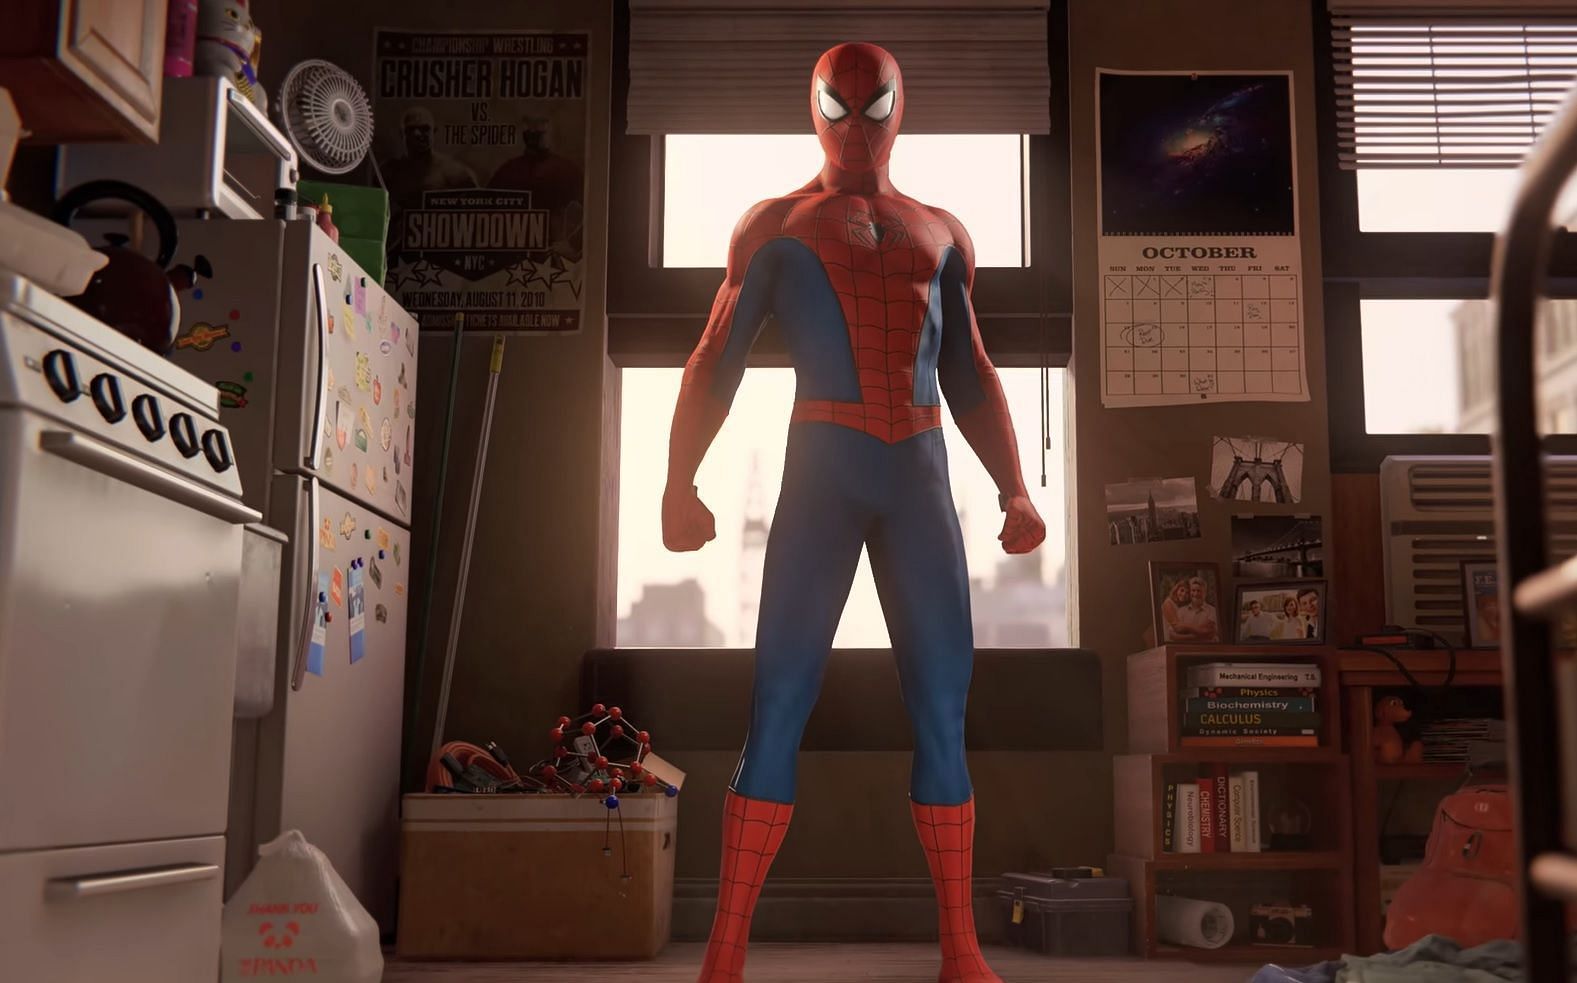 SpiderMan plays Roblox on the Ps4 